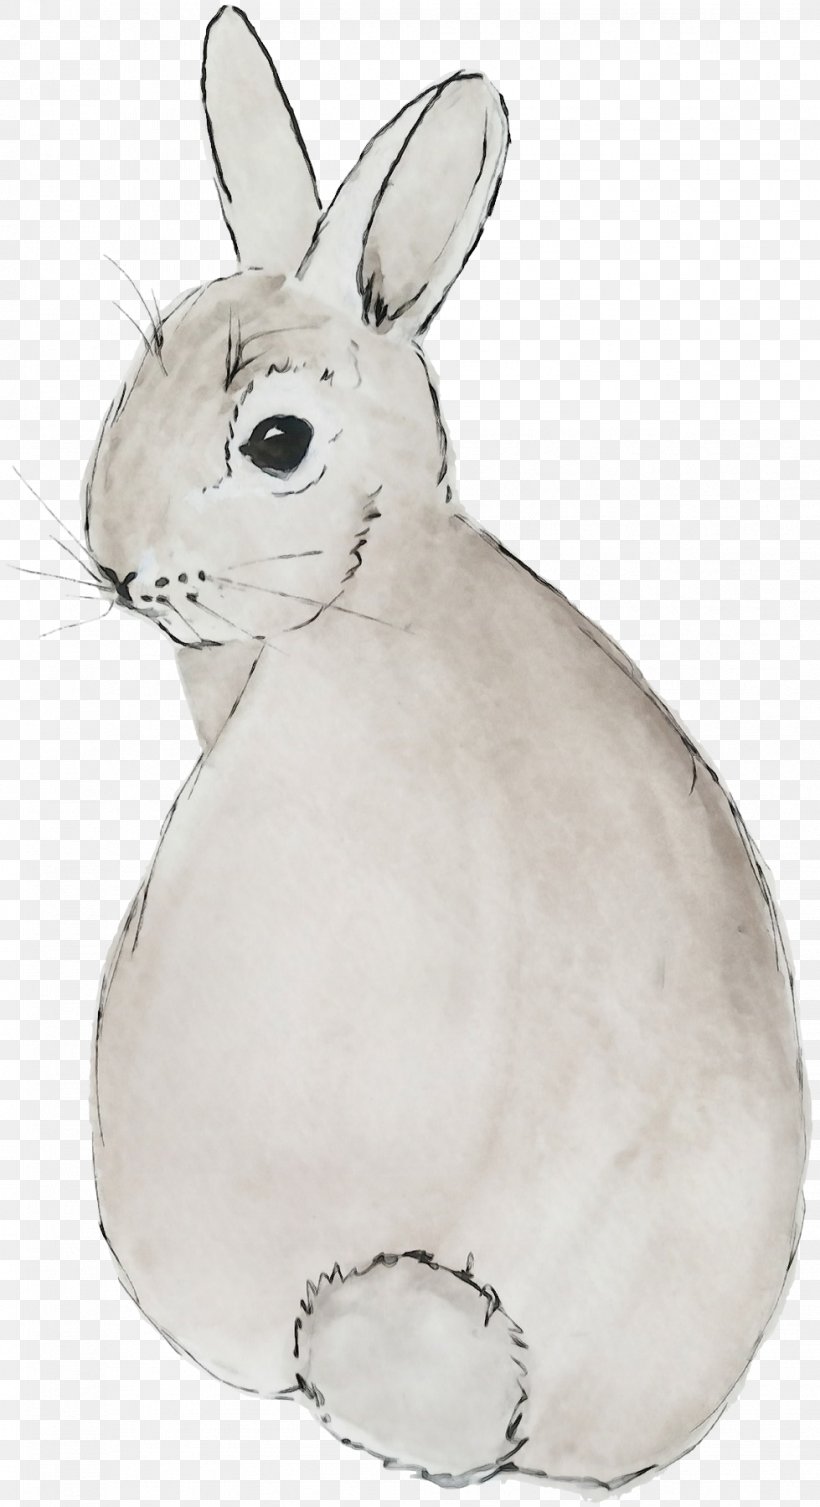 Rabbit Mountain Cottontail Domestic Rabbit Rabbits And Hares White, PNG, 979x1800px, Watercolor, Arctic Hare, Domestic Rabbit, Hare, Mountain Cottontail Download Free